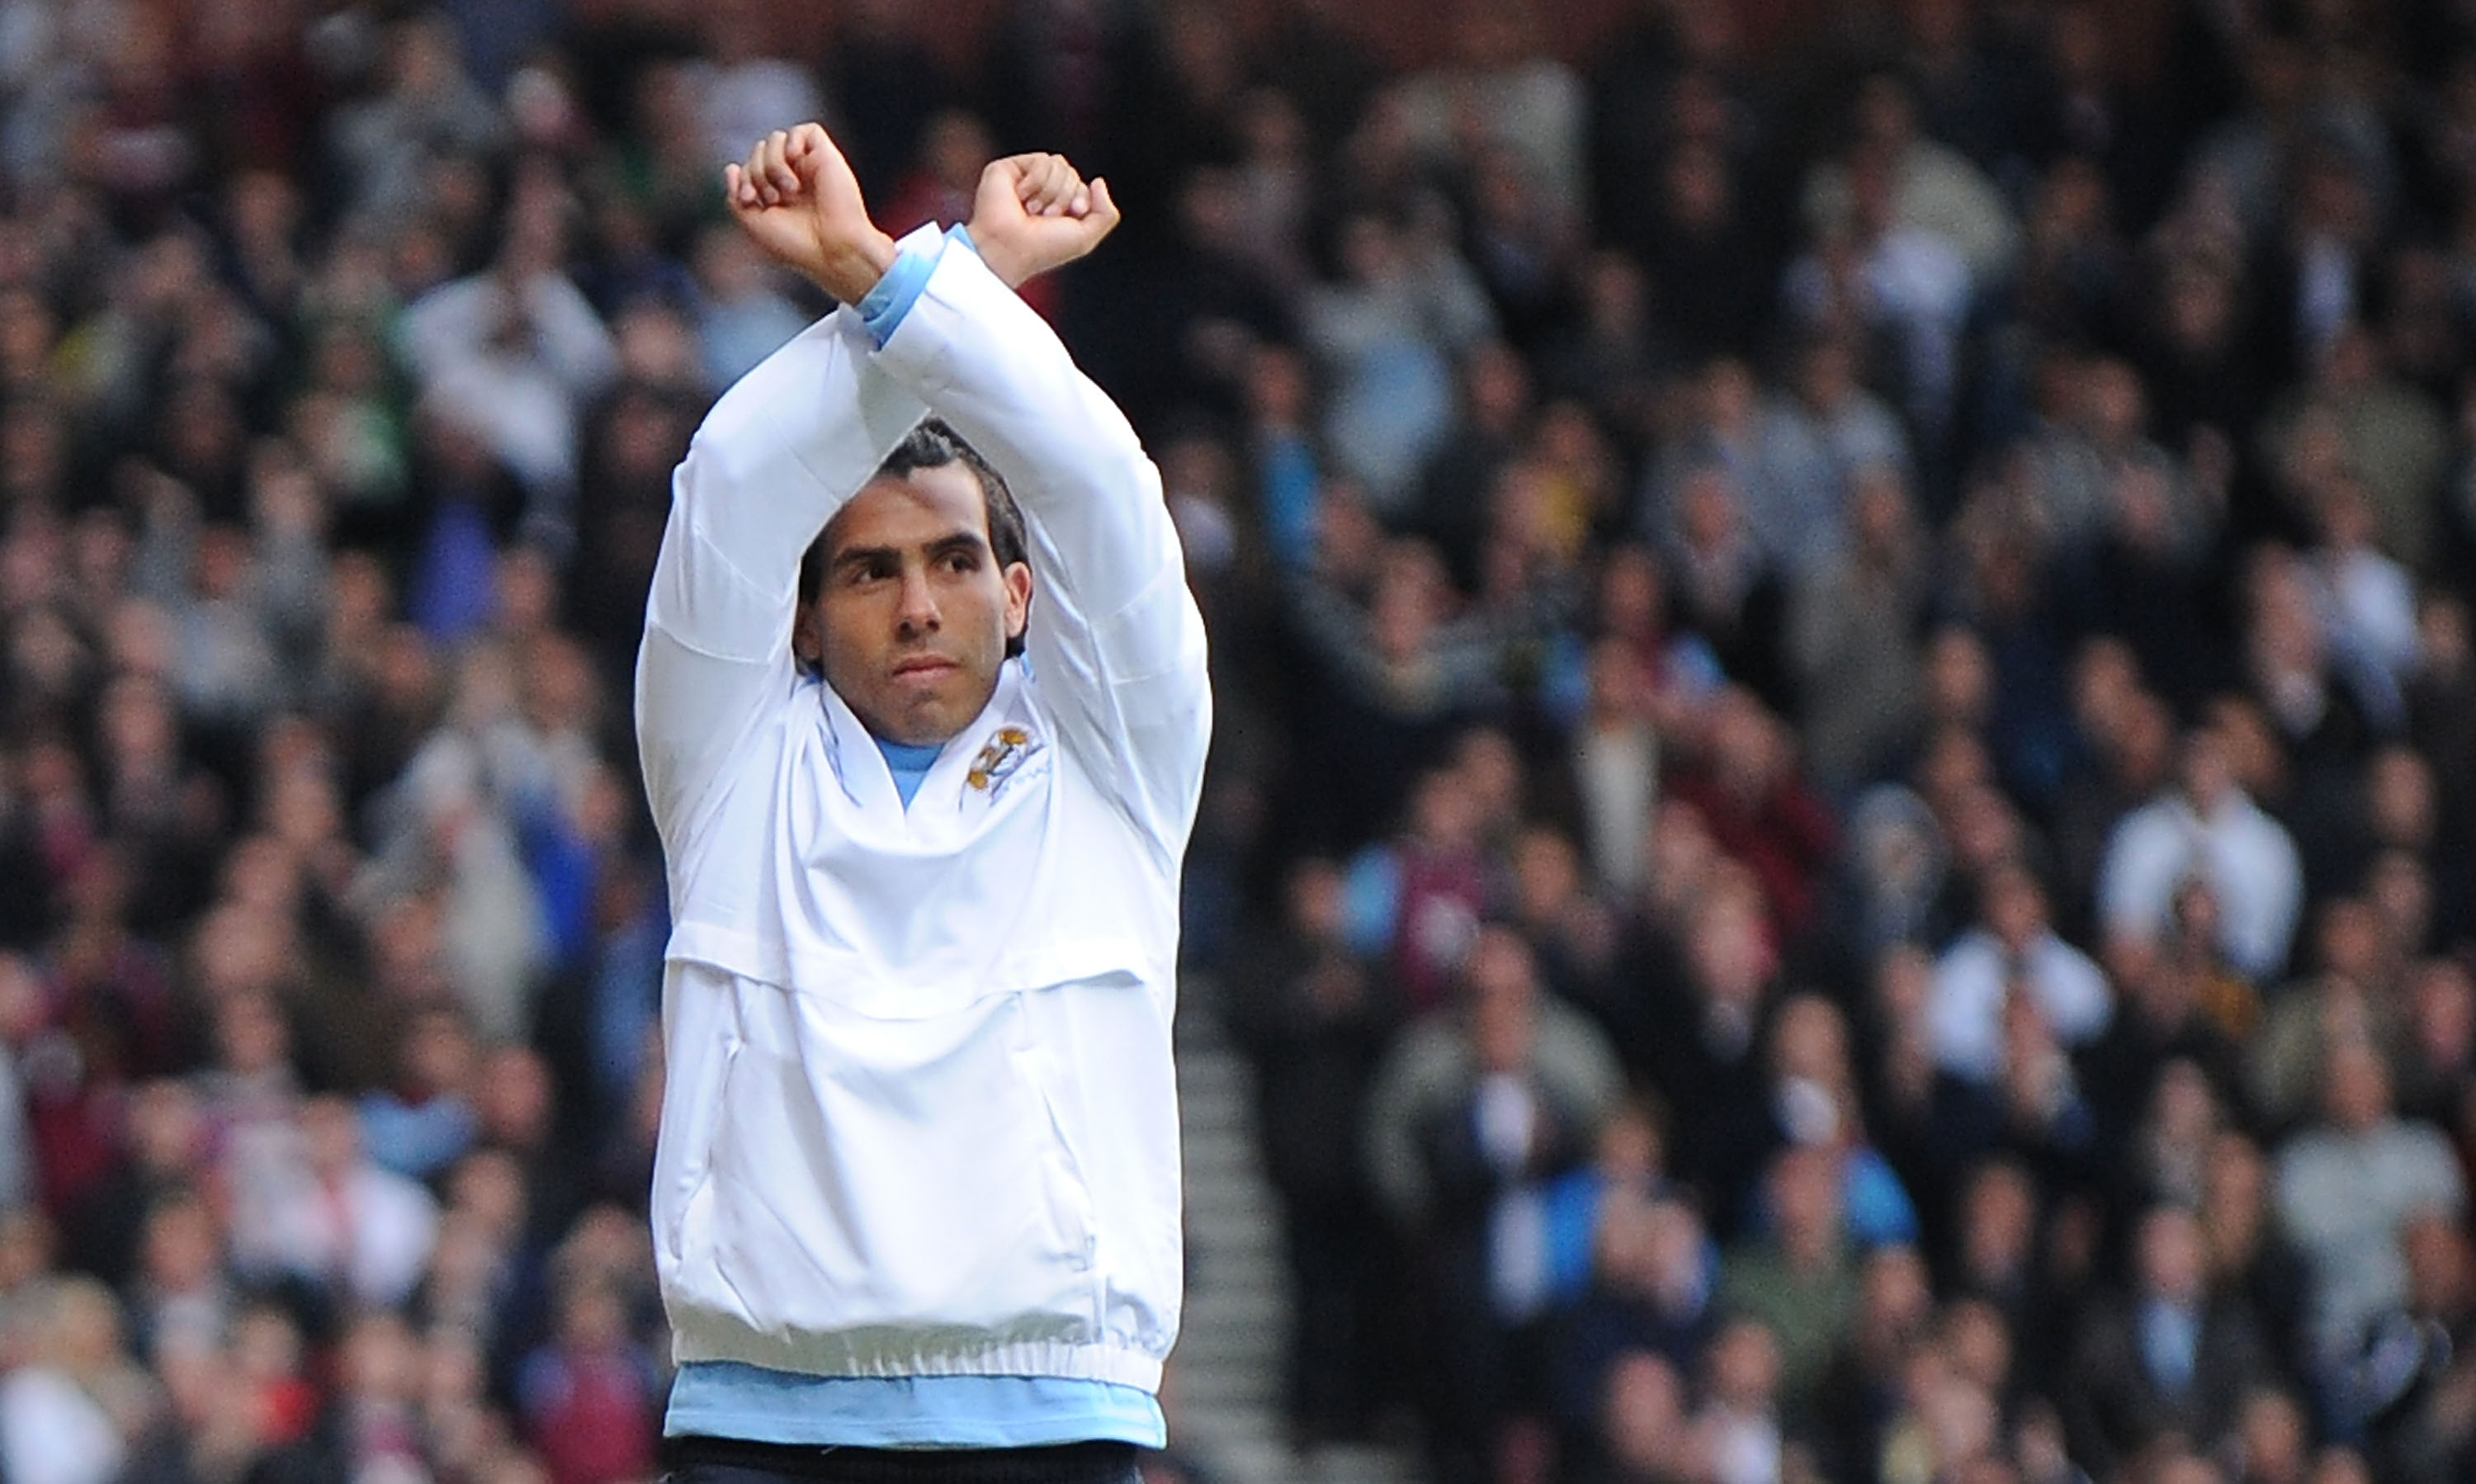 LONDON, ENGLAND - MAY 09:  Carlos Tevez of Man City gives a Hammers sign to the West Ham fans as they cheer his name during the Barclays Premier League match between West Ham United and Manchester City at Boleyn Ground on May 9, 2010 in London, England.  (Photo by Christopher Lee/Getty Images)